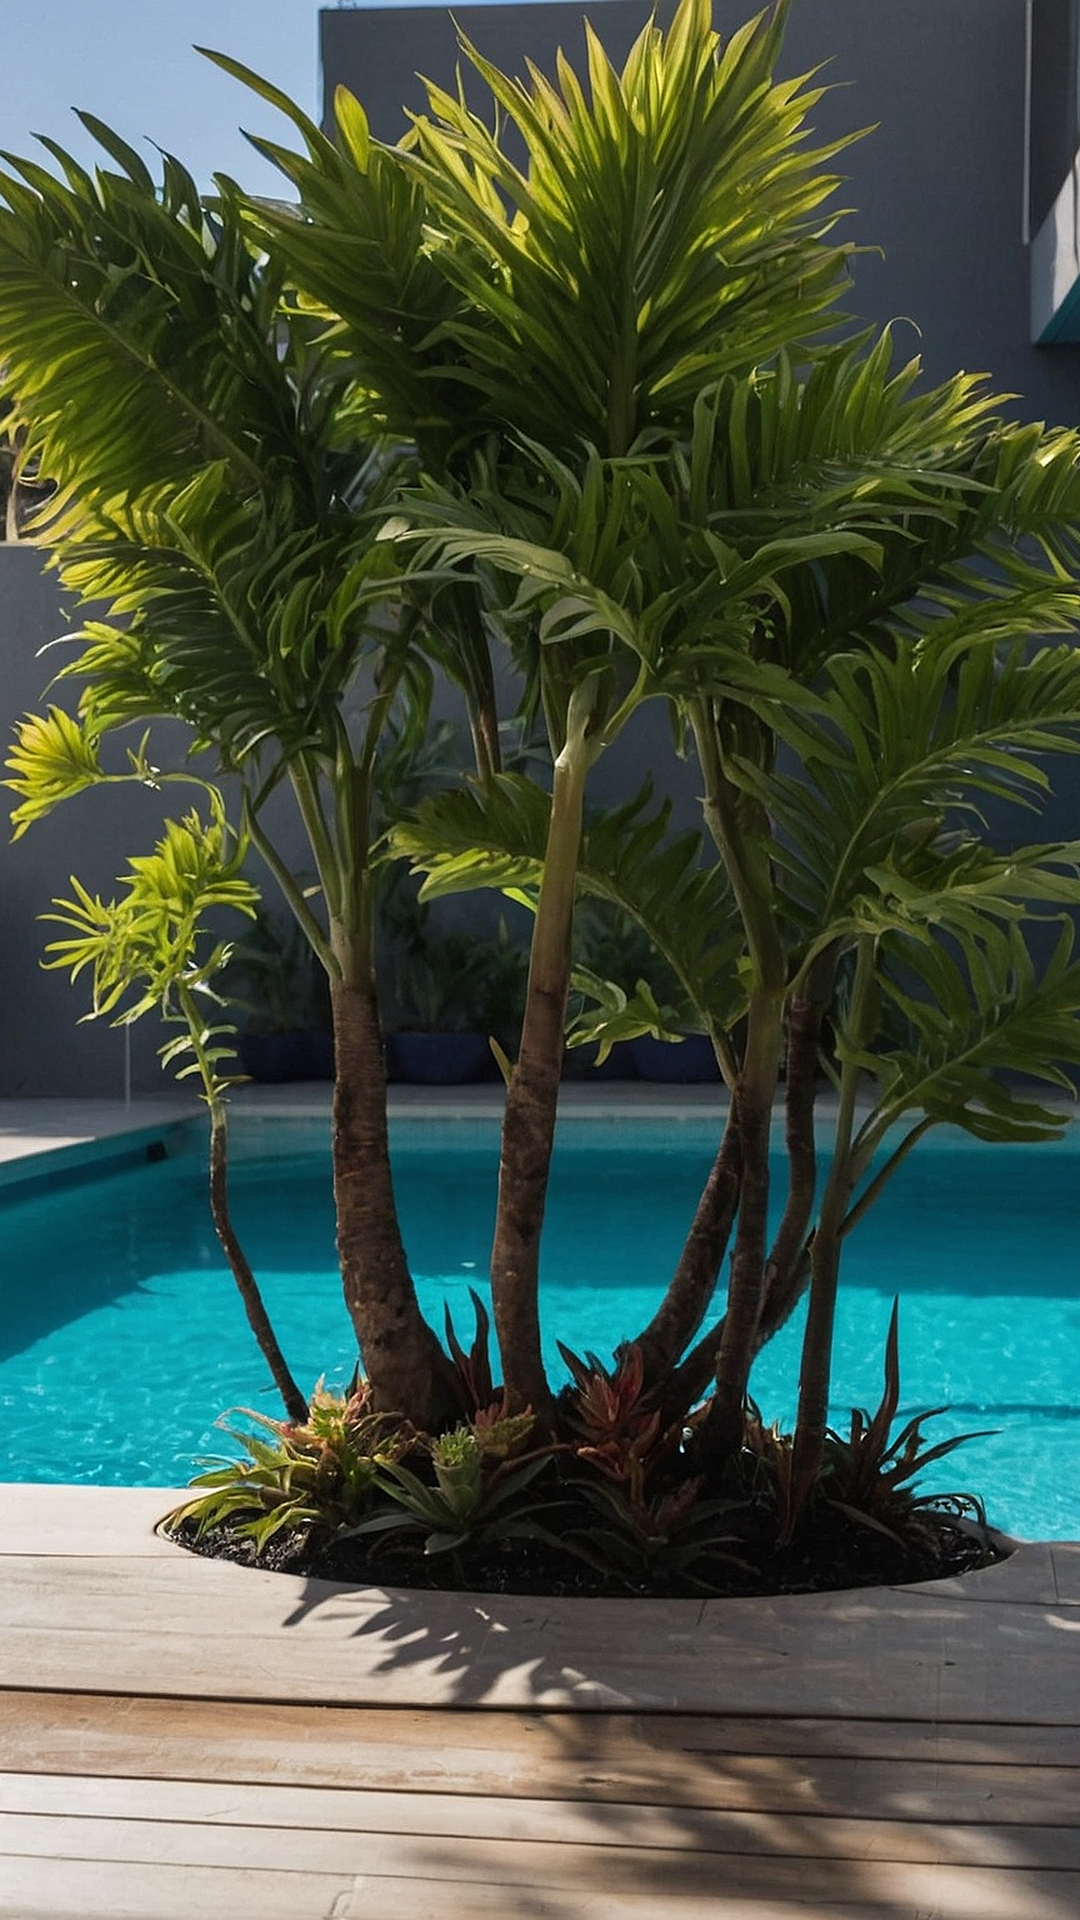 Inspiring Poolside Flora: Picture Perfect Gardens.